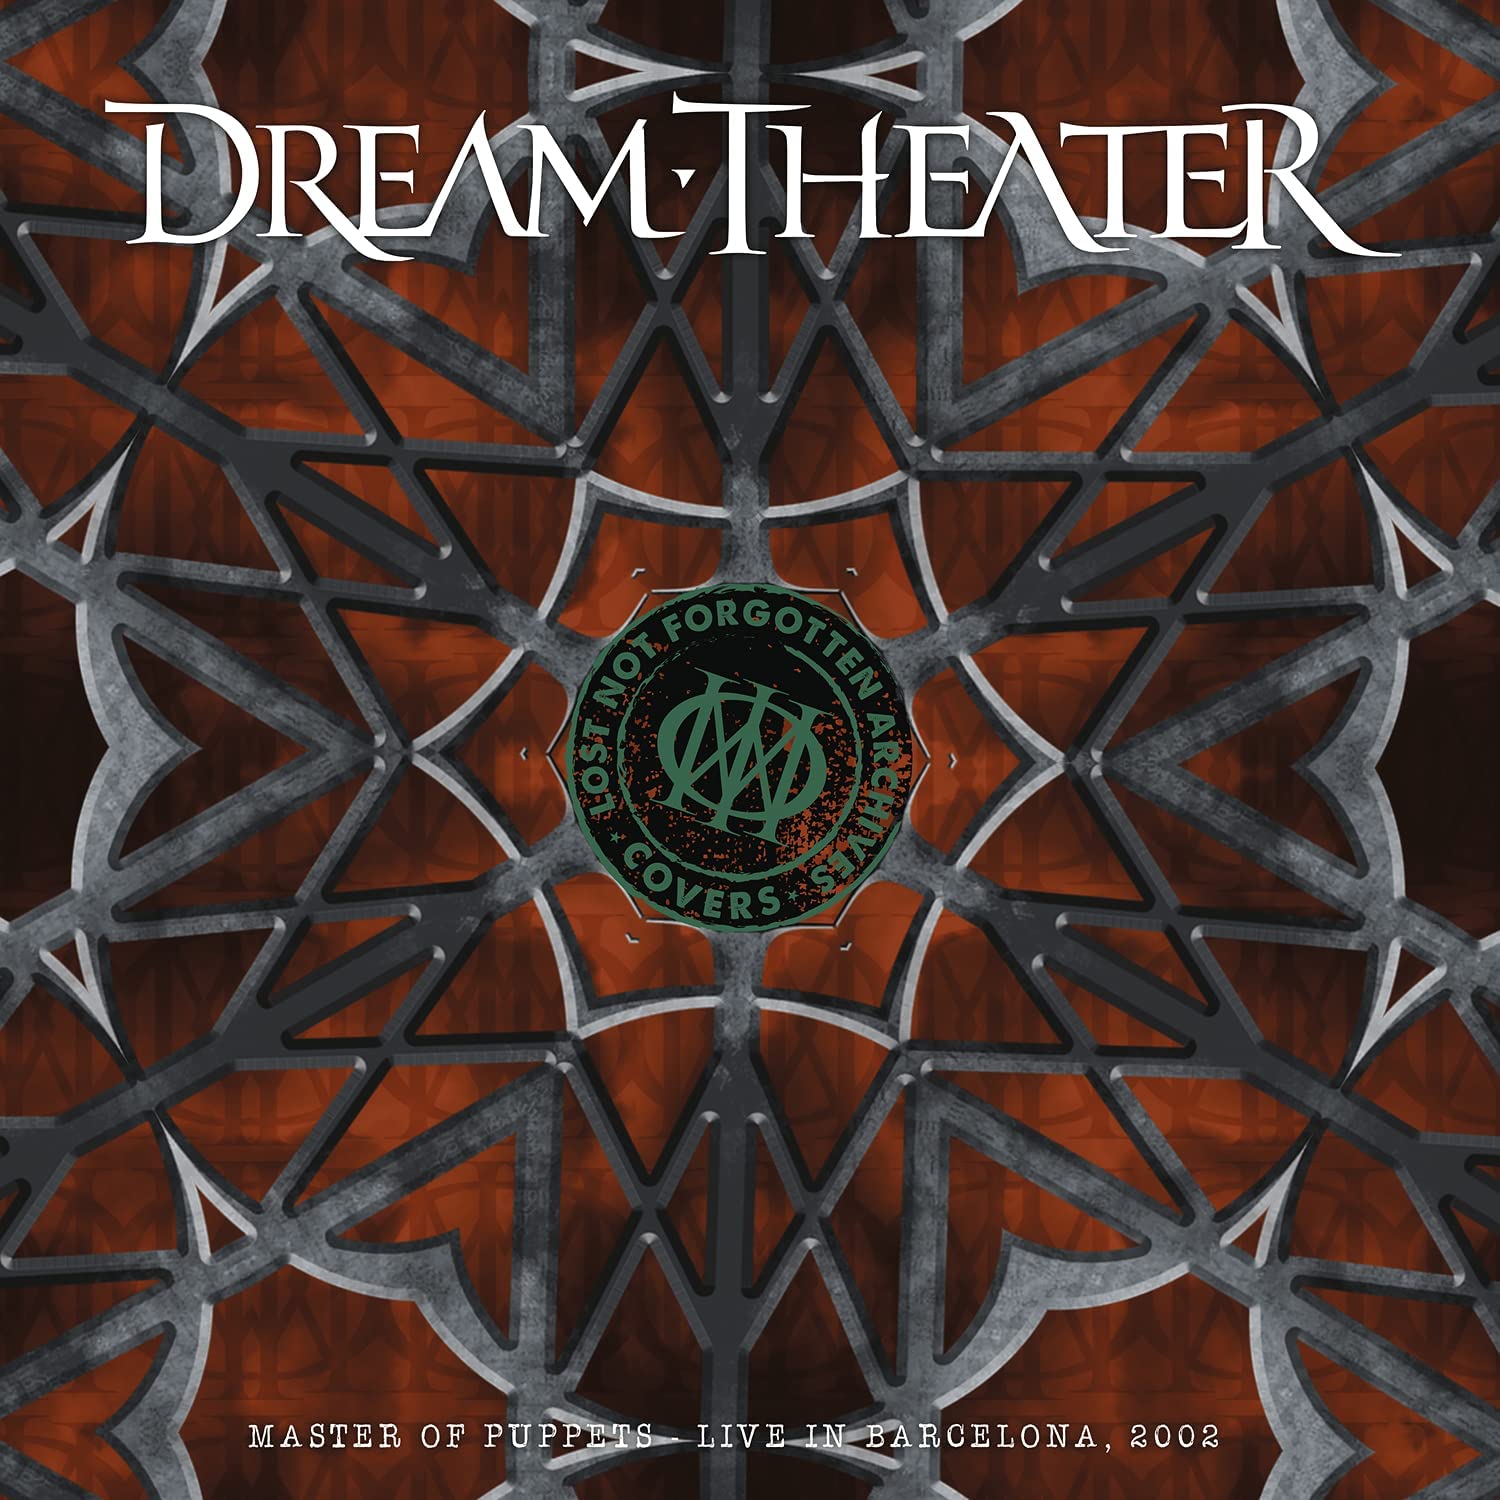 Lost Not Forgotten Archives: Master of Puppets - Live in Barcelona, 2002 - Vinyl | Dream Theater